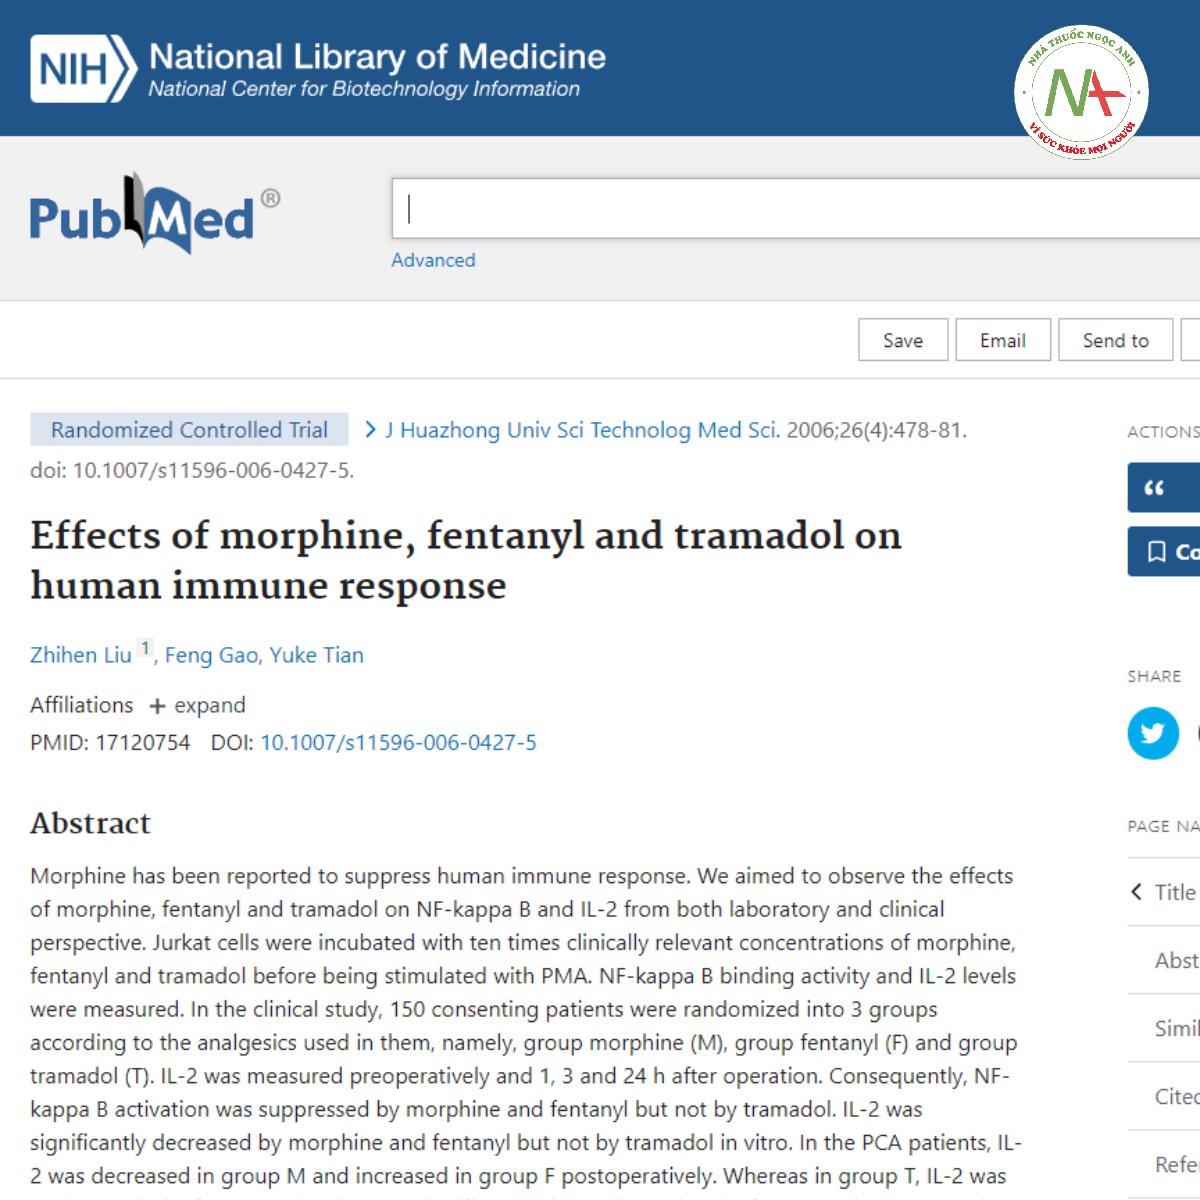 Effects of morphine, fentanyl and tramadol on human immune response